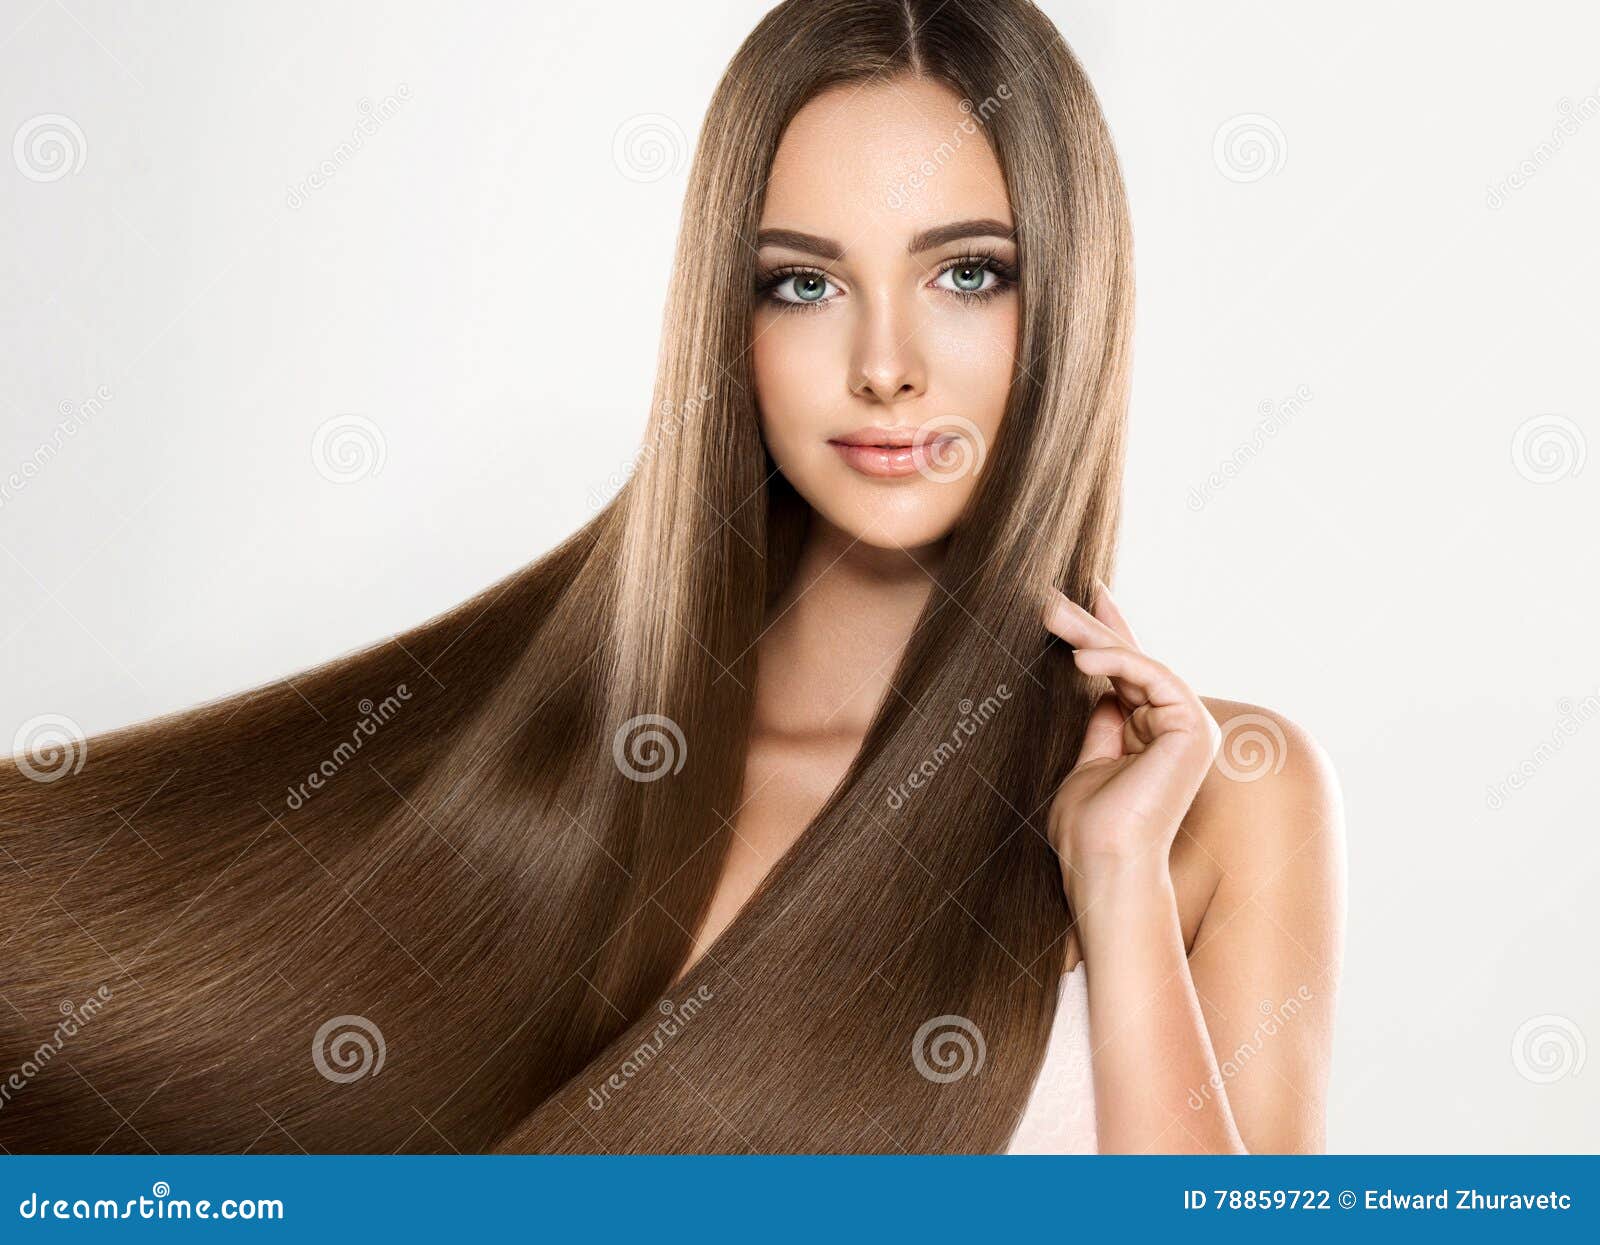 young attractive model with long, straight,brown hair.